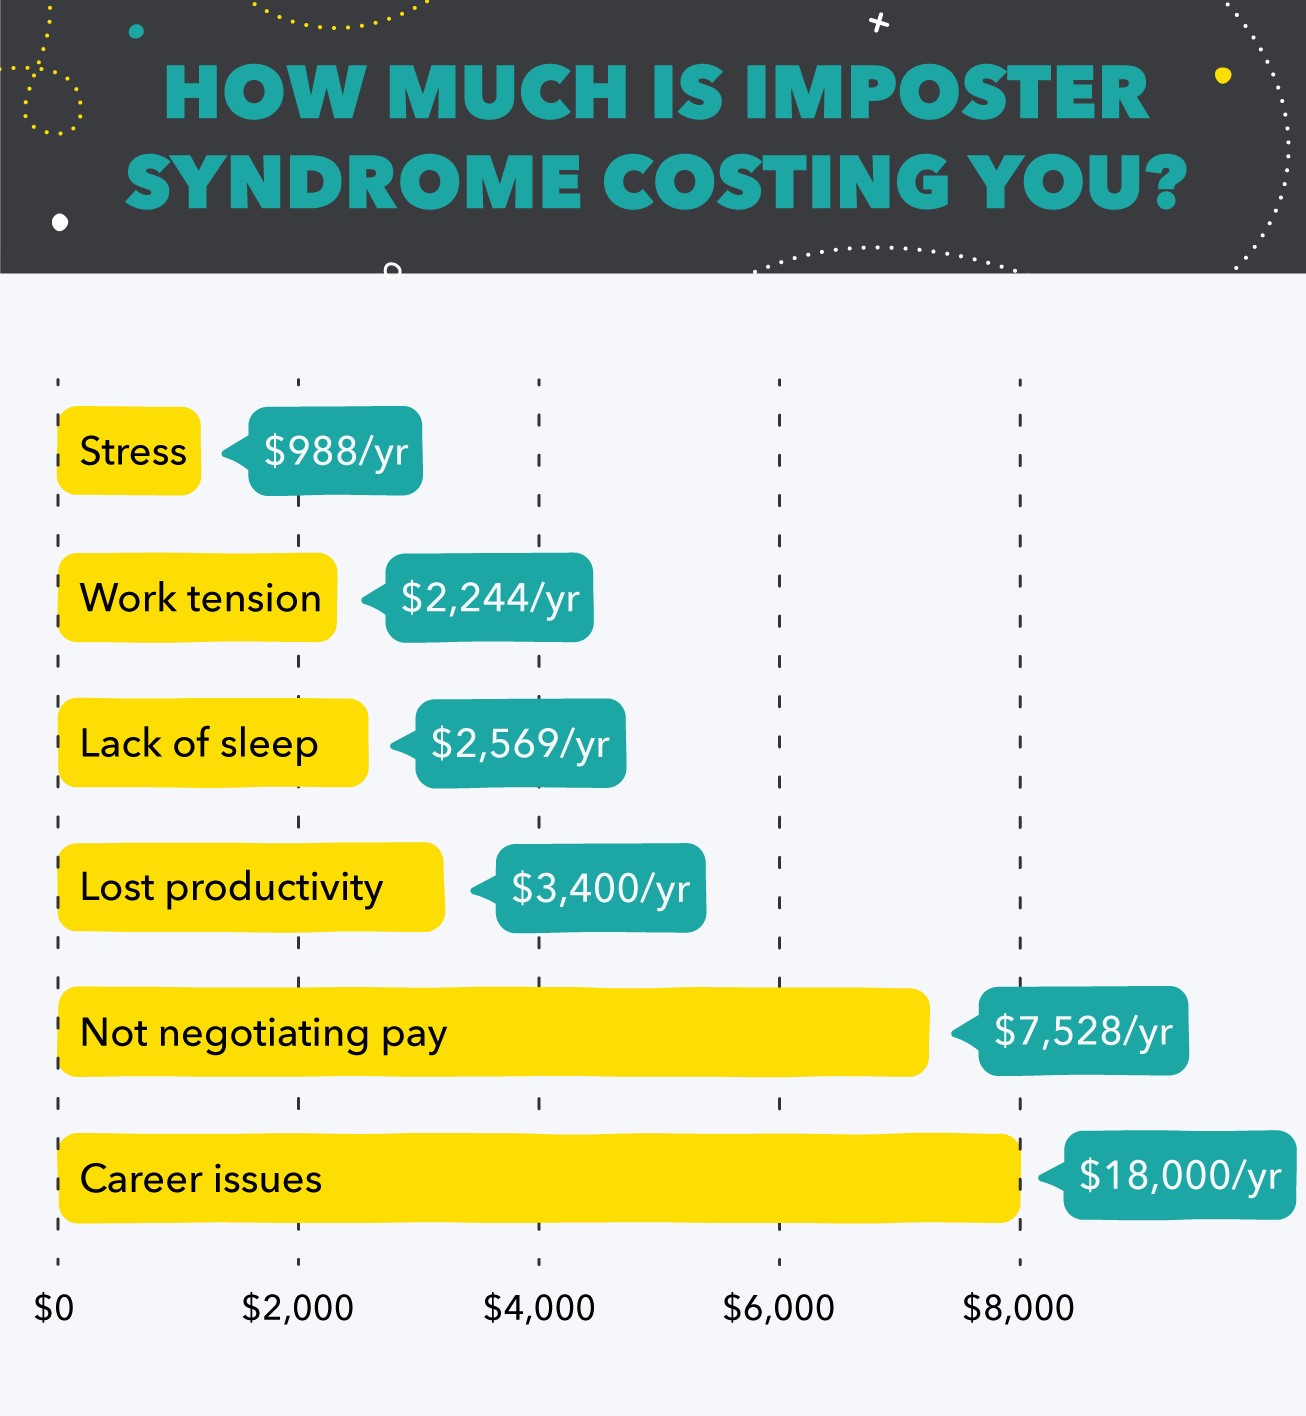 How much is imposter syndrome costing you